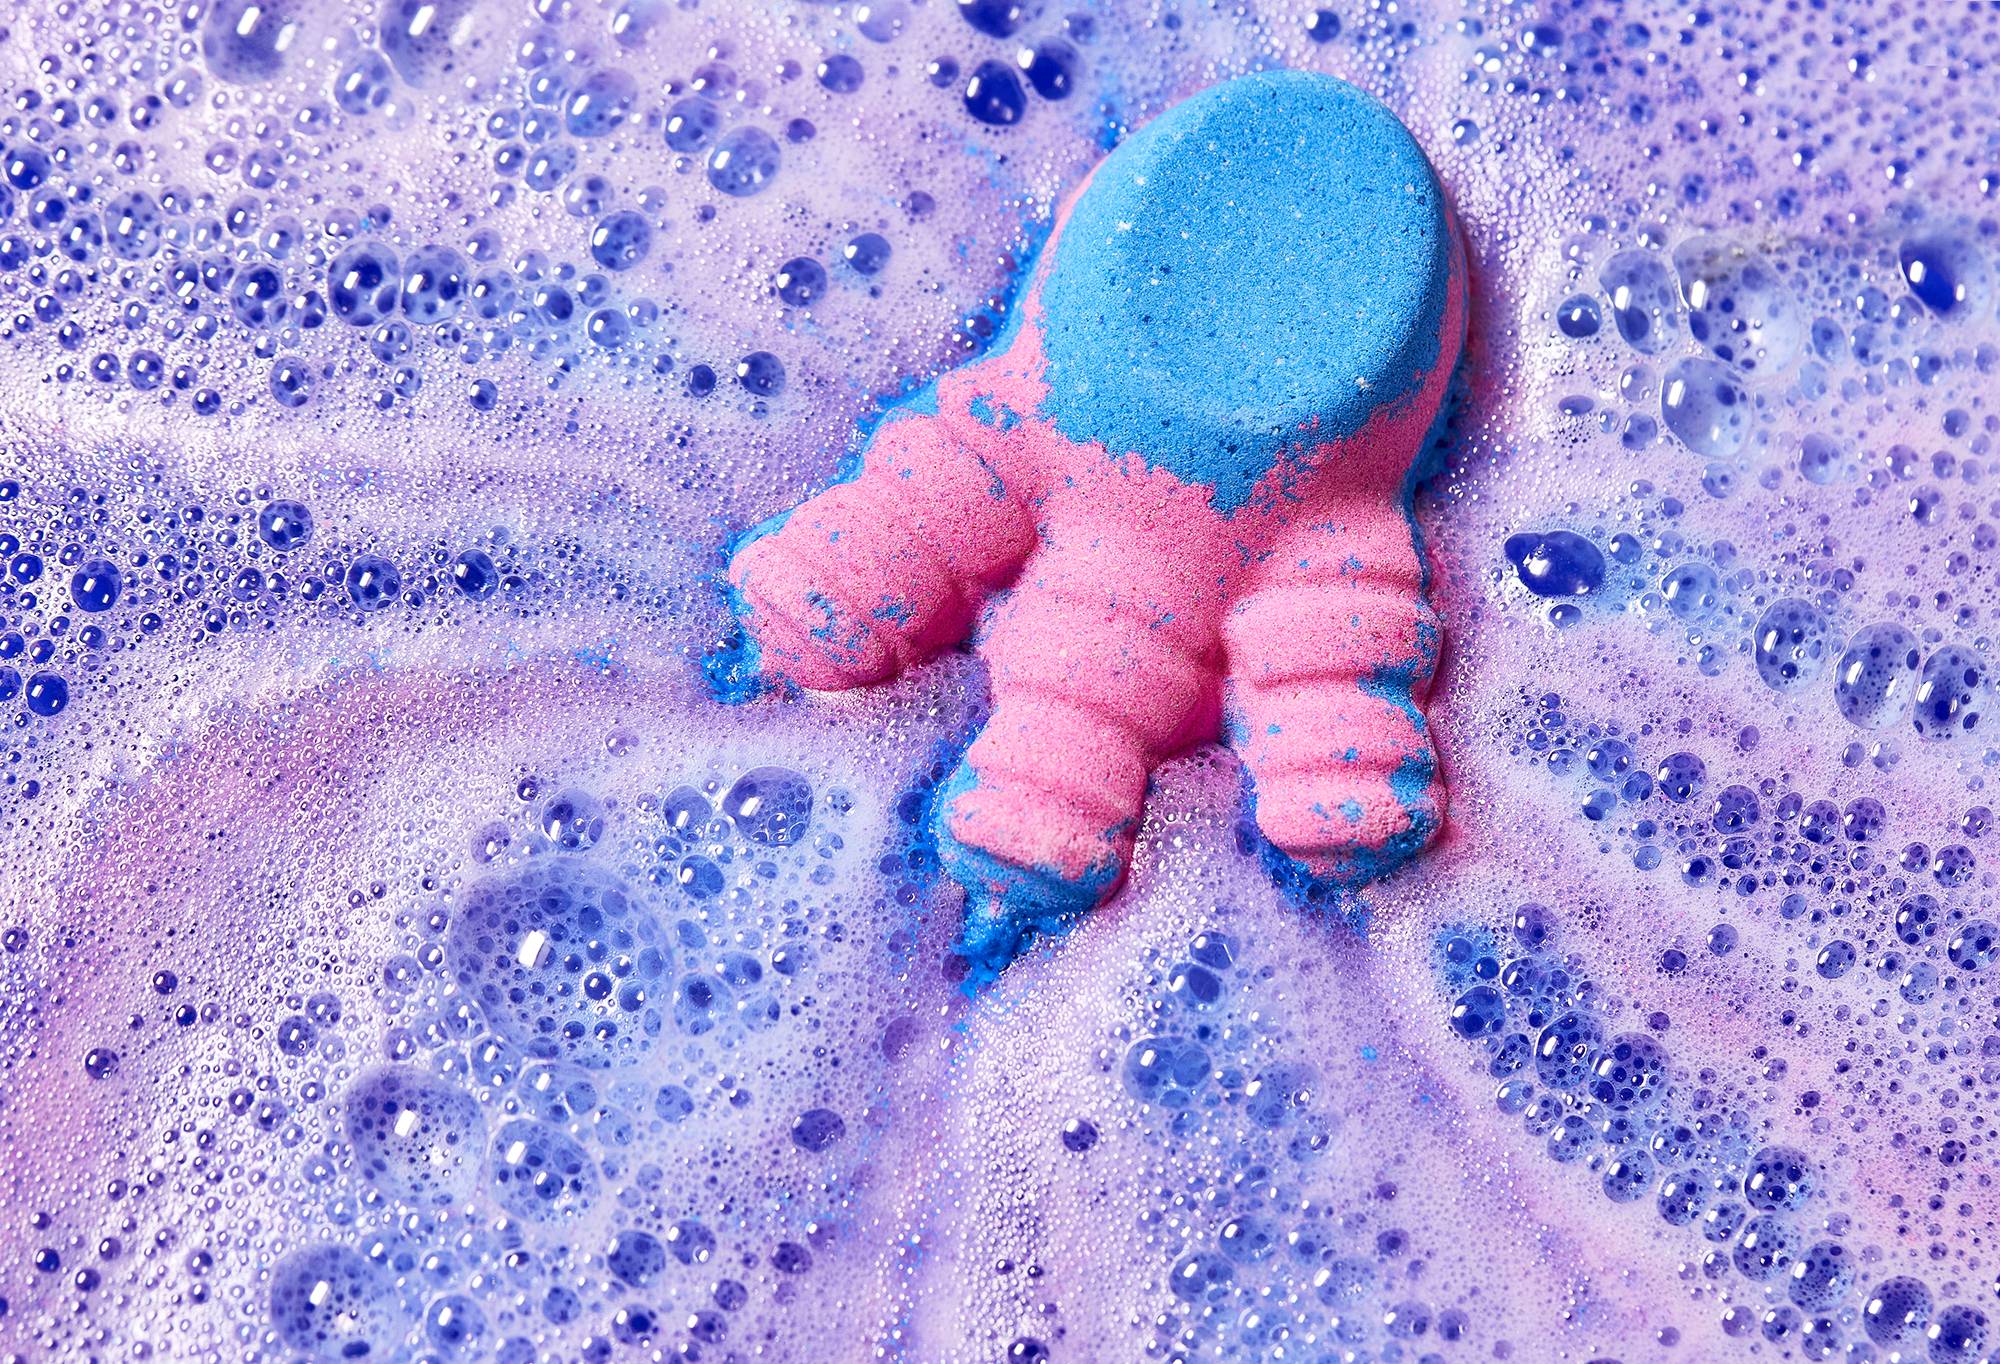 The bath bomb fizzes in the water, releasing blue and pink foam trails across the surface.